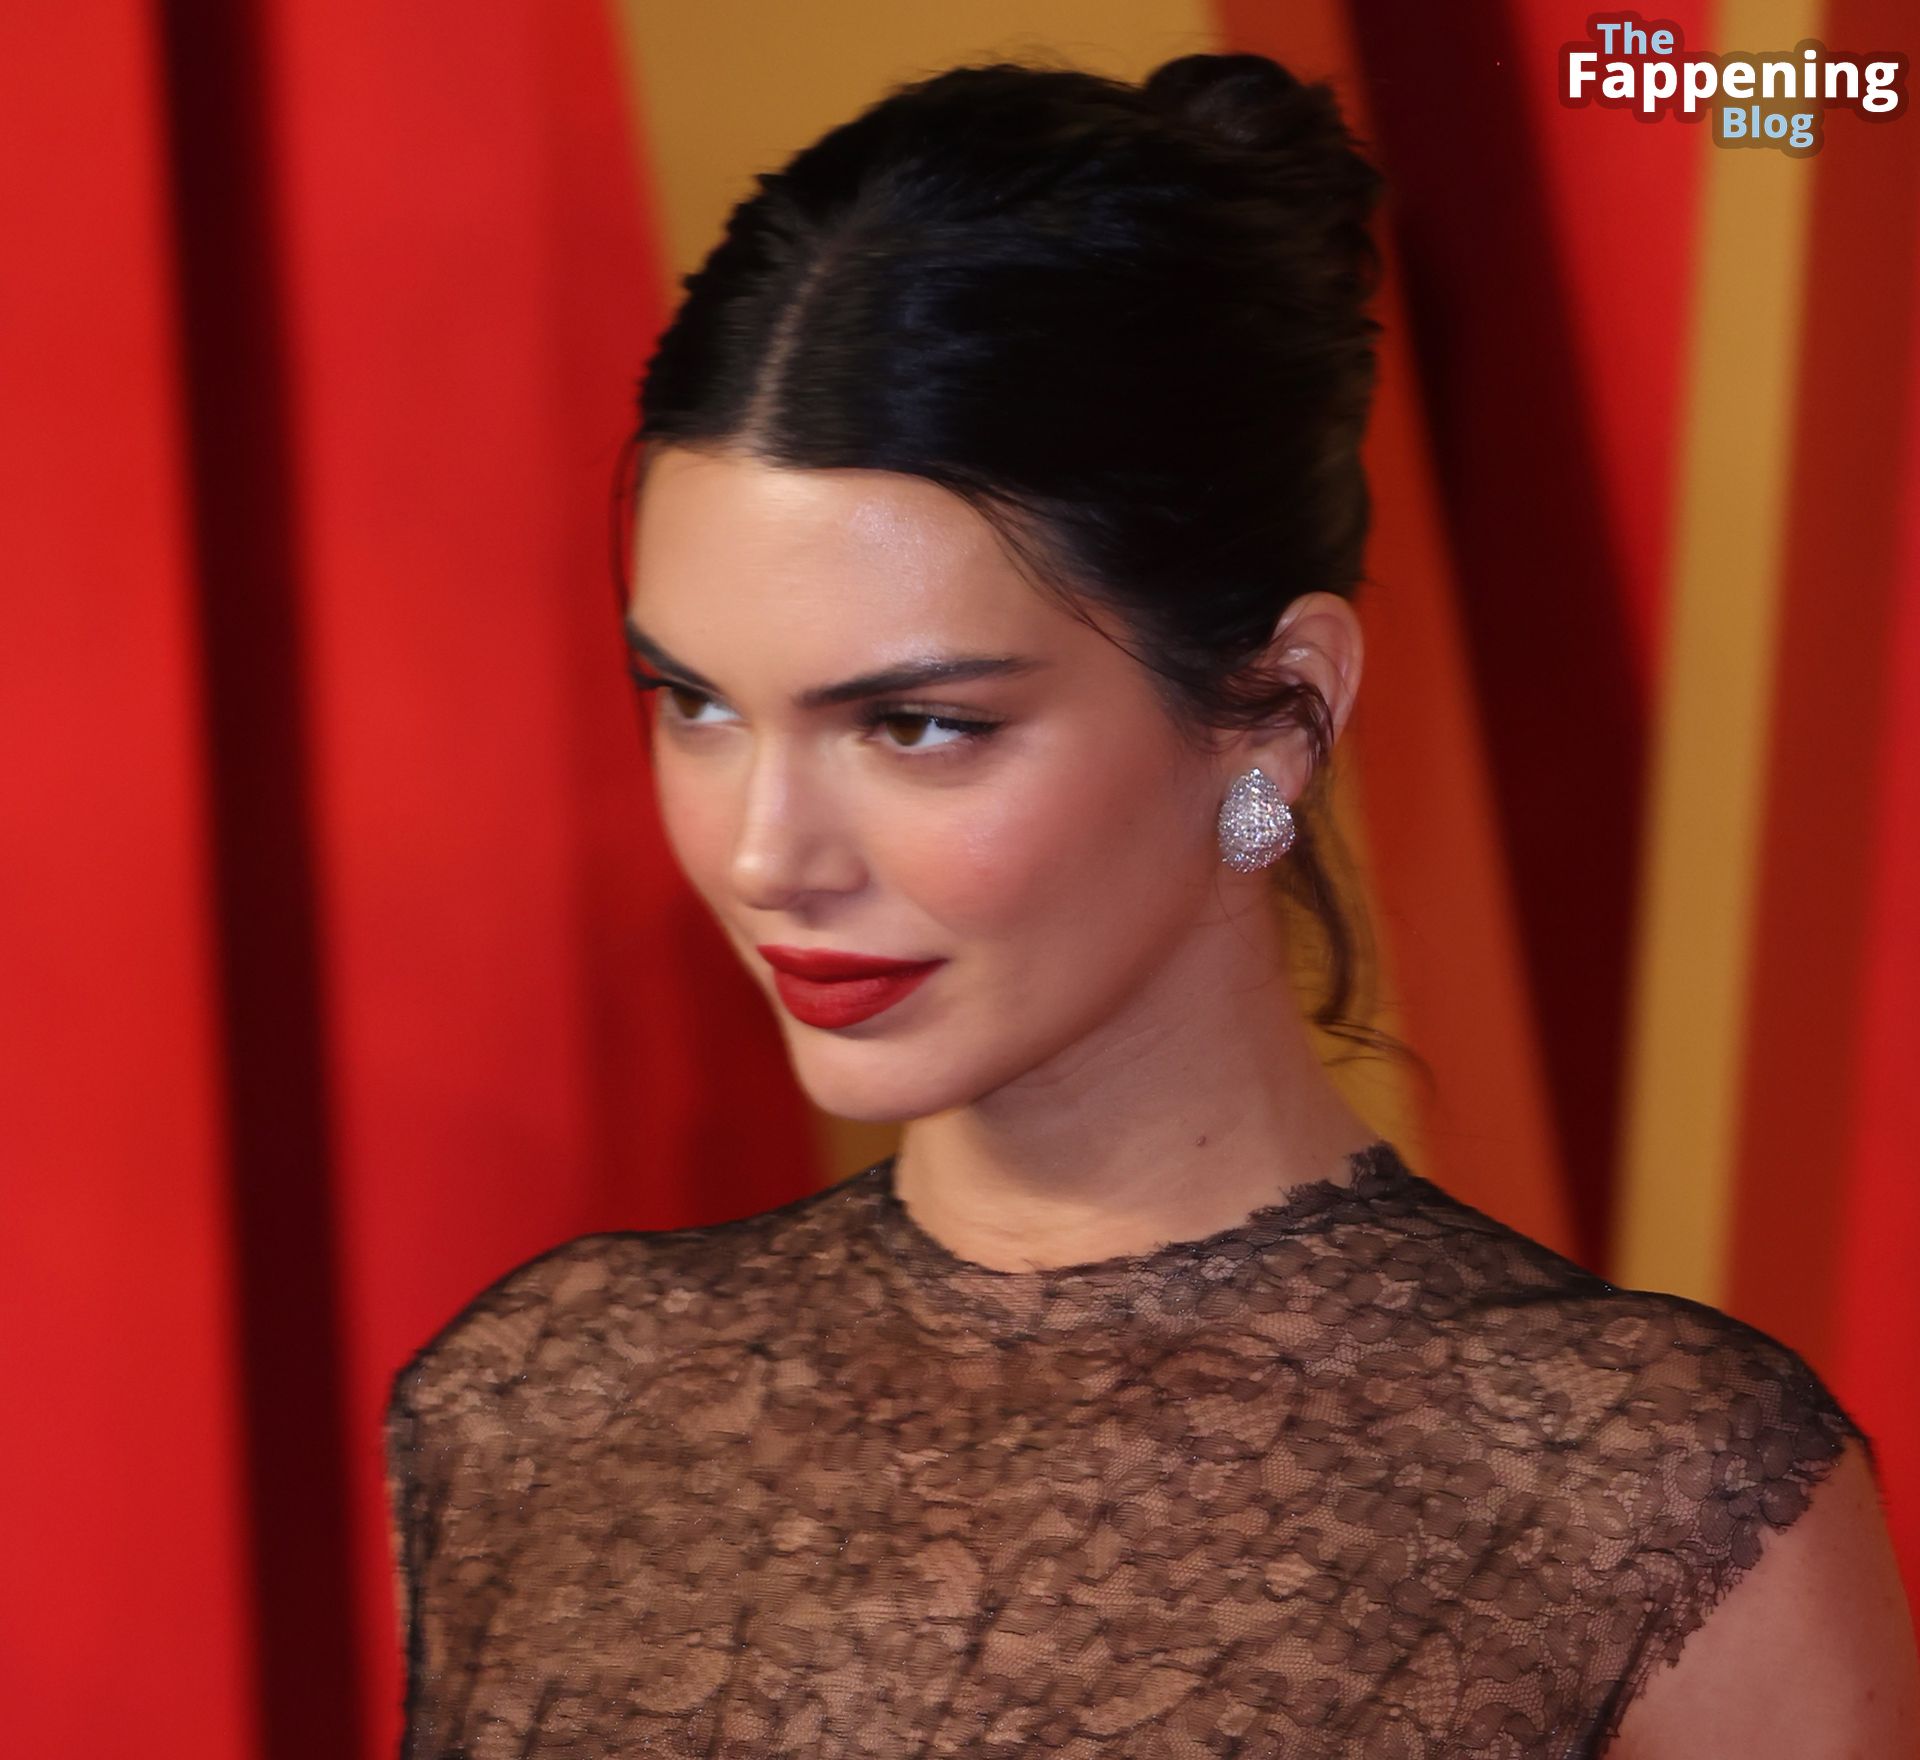 Kendall-Jenner-Sexy-114-The-Fappening-Blog.jpg